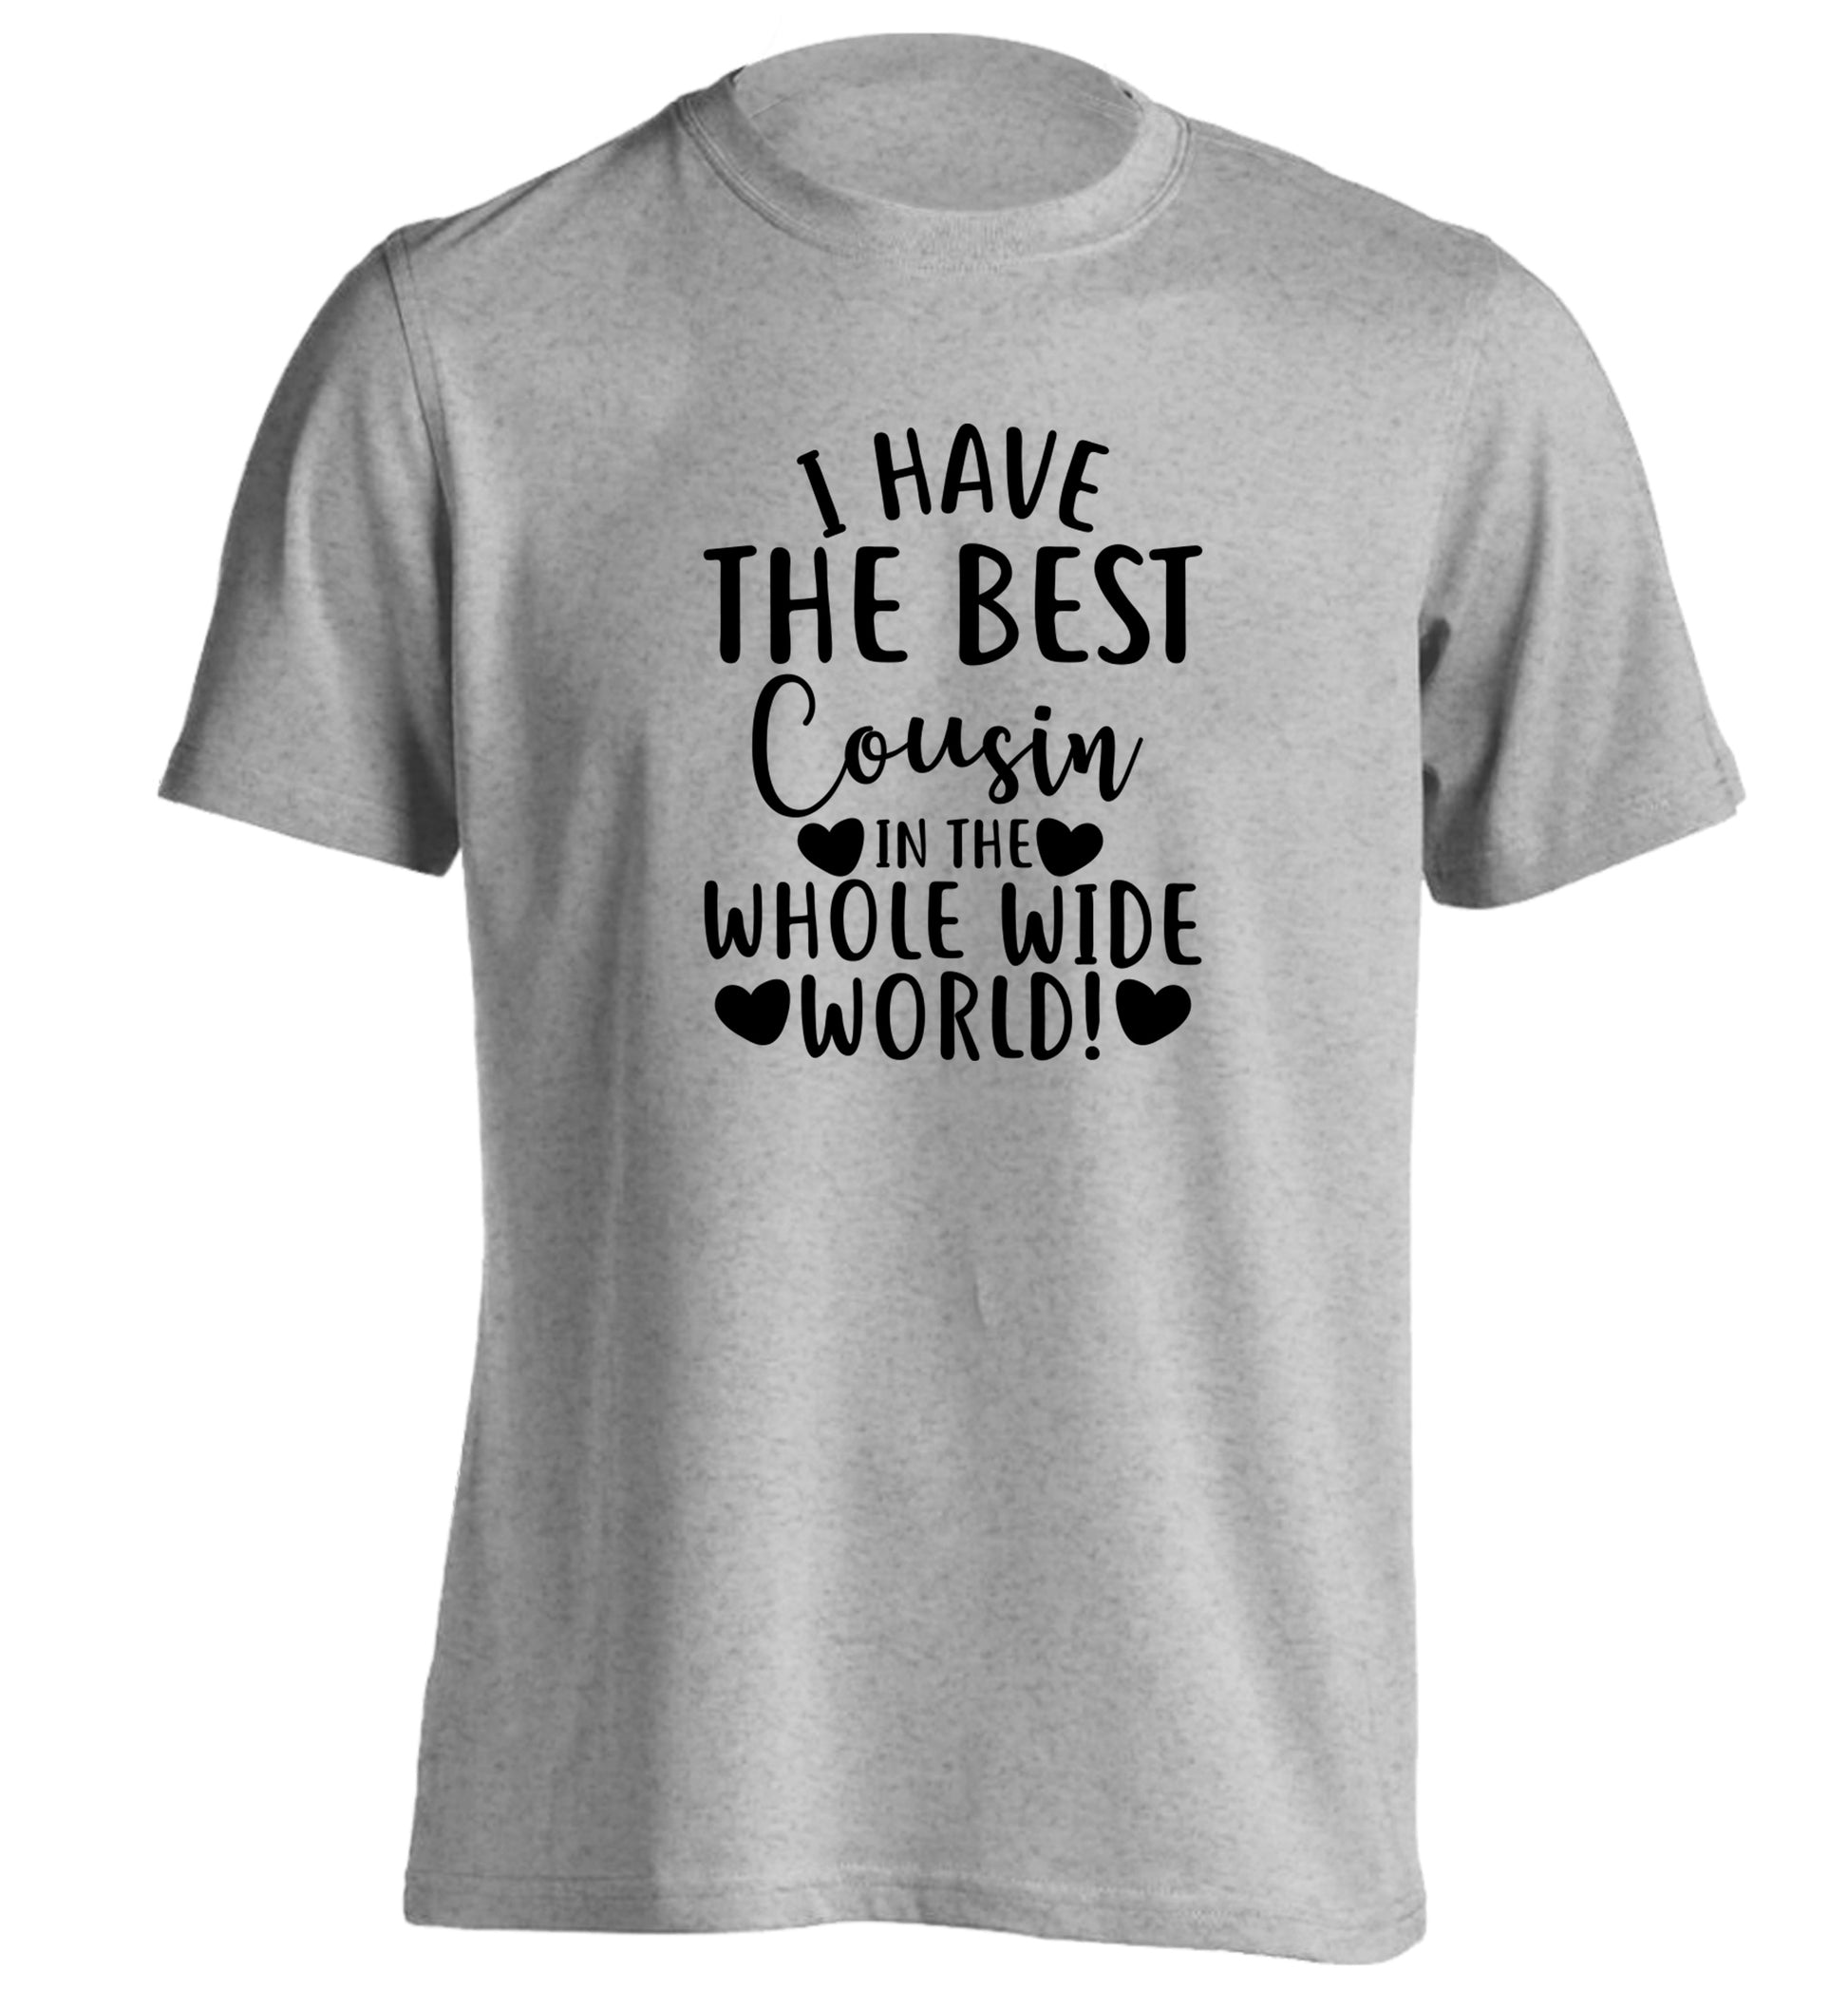 I have the best cousin in the whole wide world! adults unisex grey Tshirt 2XL